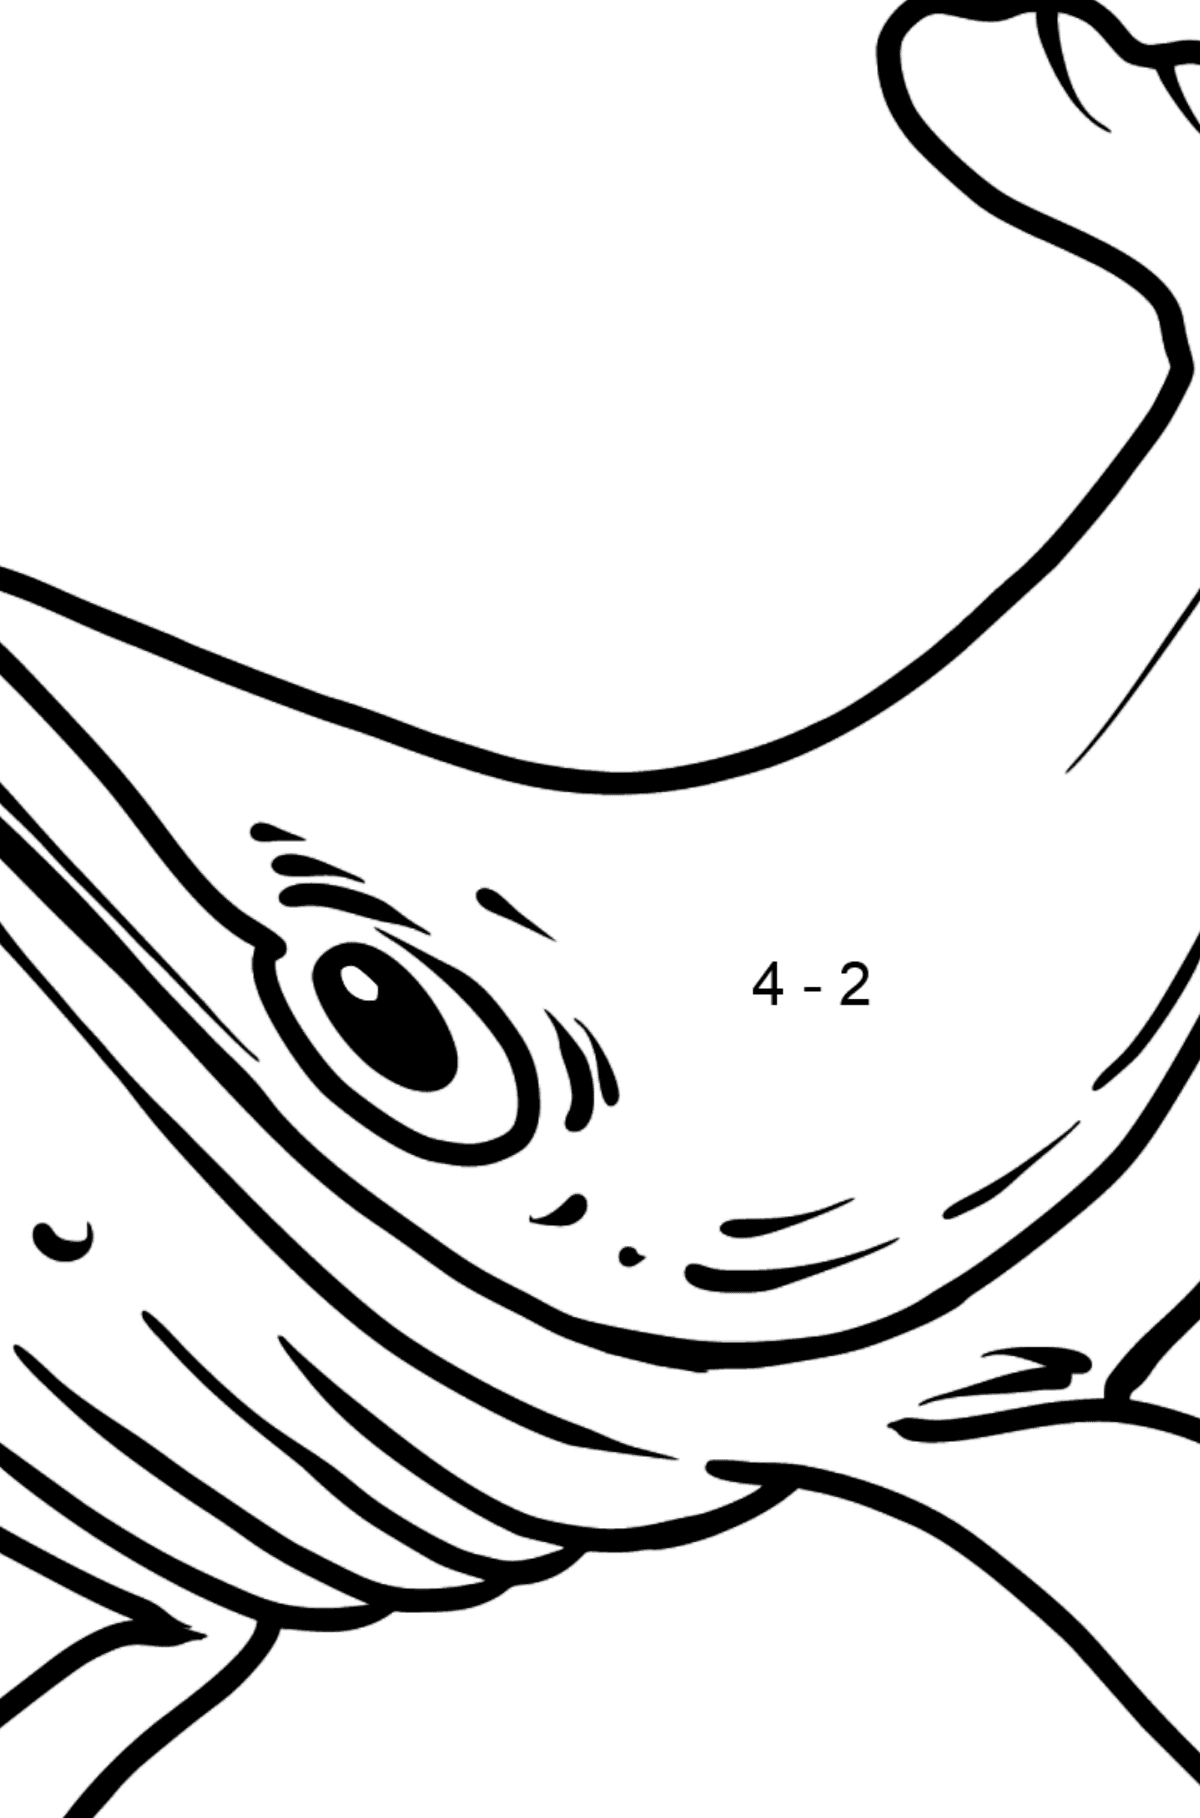 Whale coloring page - Math Coloring - Subtraction for Kids